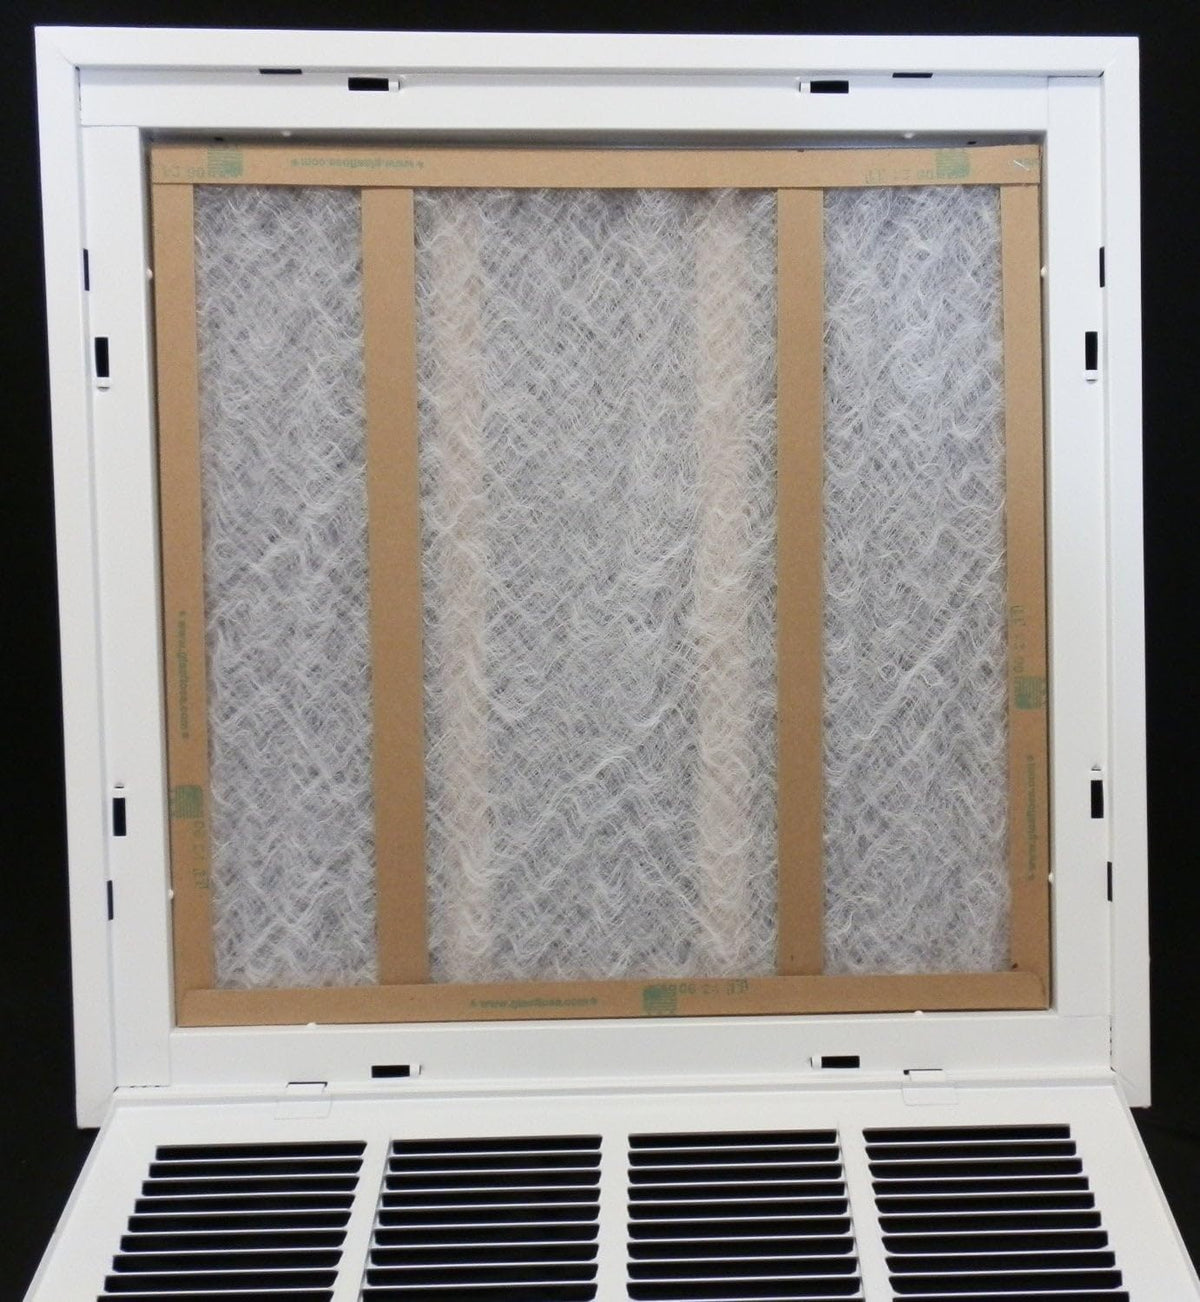 16&quot; X 30&quot; Steel Return Air Filter Grille for 1&quot; Filter - Removable Frame - [Outer Dimensions: 18 5/8&quot; X 32 5/8&quot;]